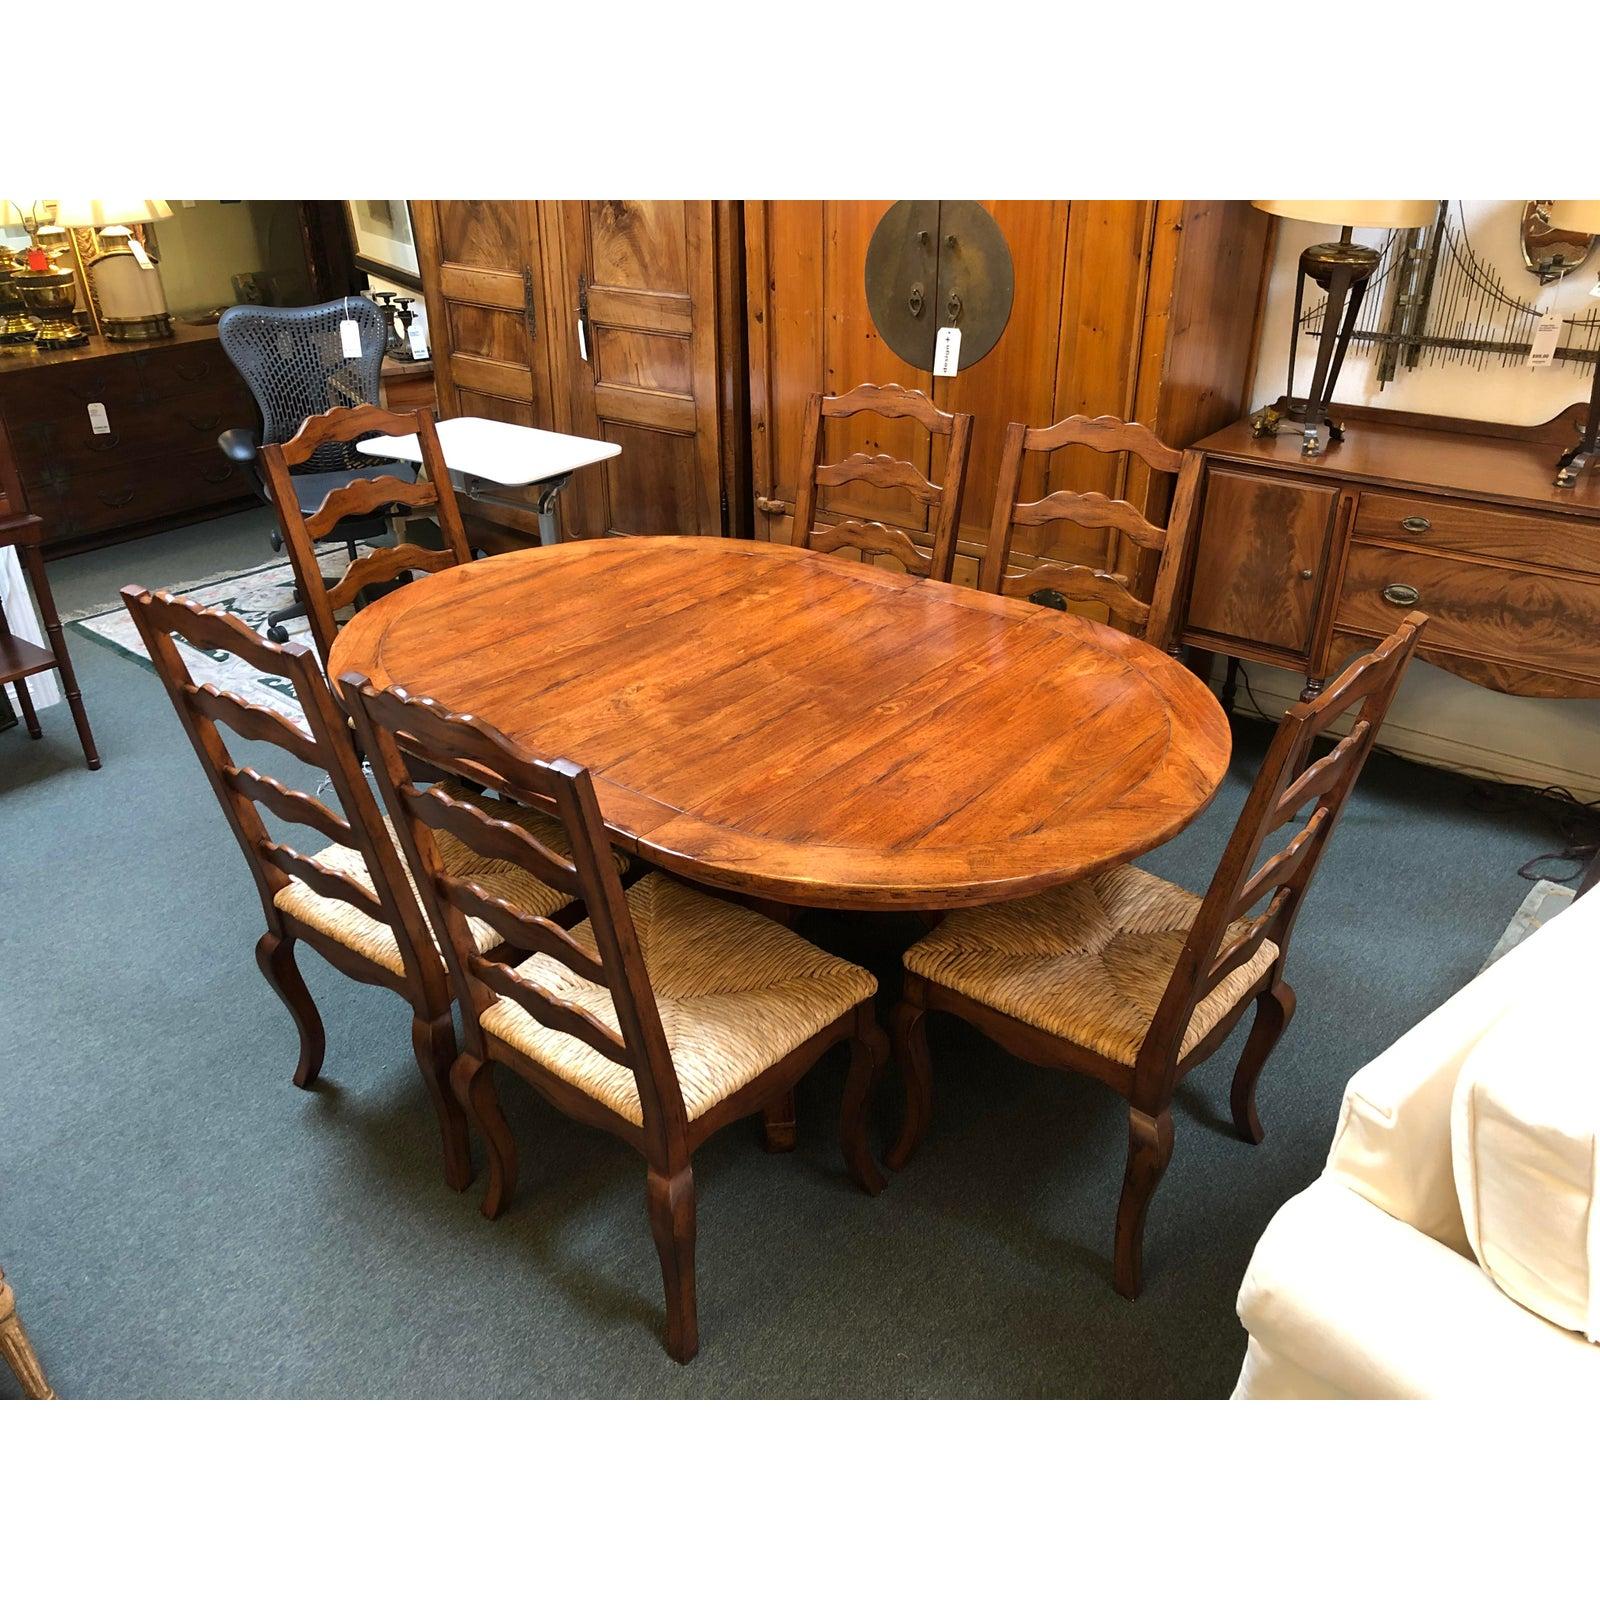 A charming dining set by Sunrise Home. The solid wood table features rustic details such as wide planks and rich wood tones. Easy expansion mechanism opens to add a pair of 12 inch leaves, changing the compact round to an oval with room enough for